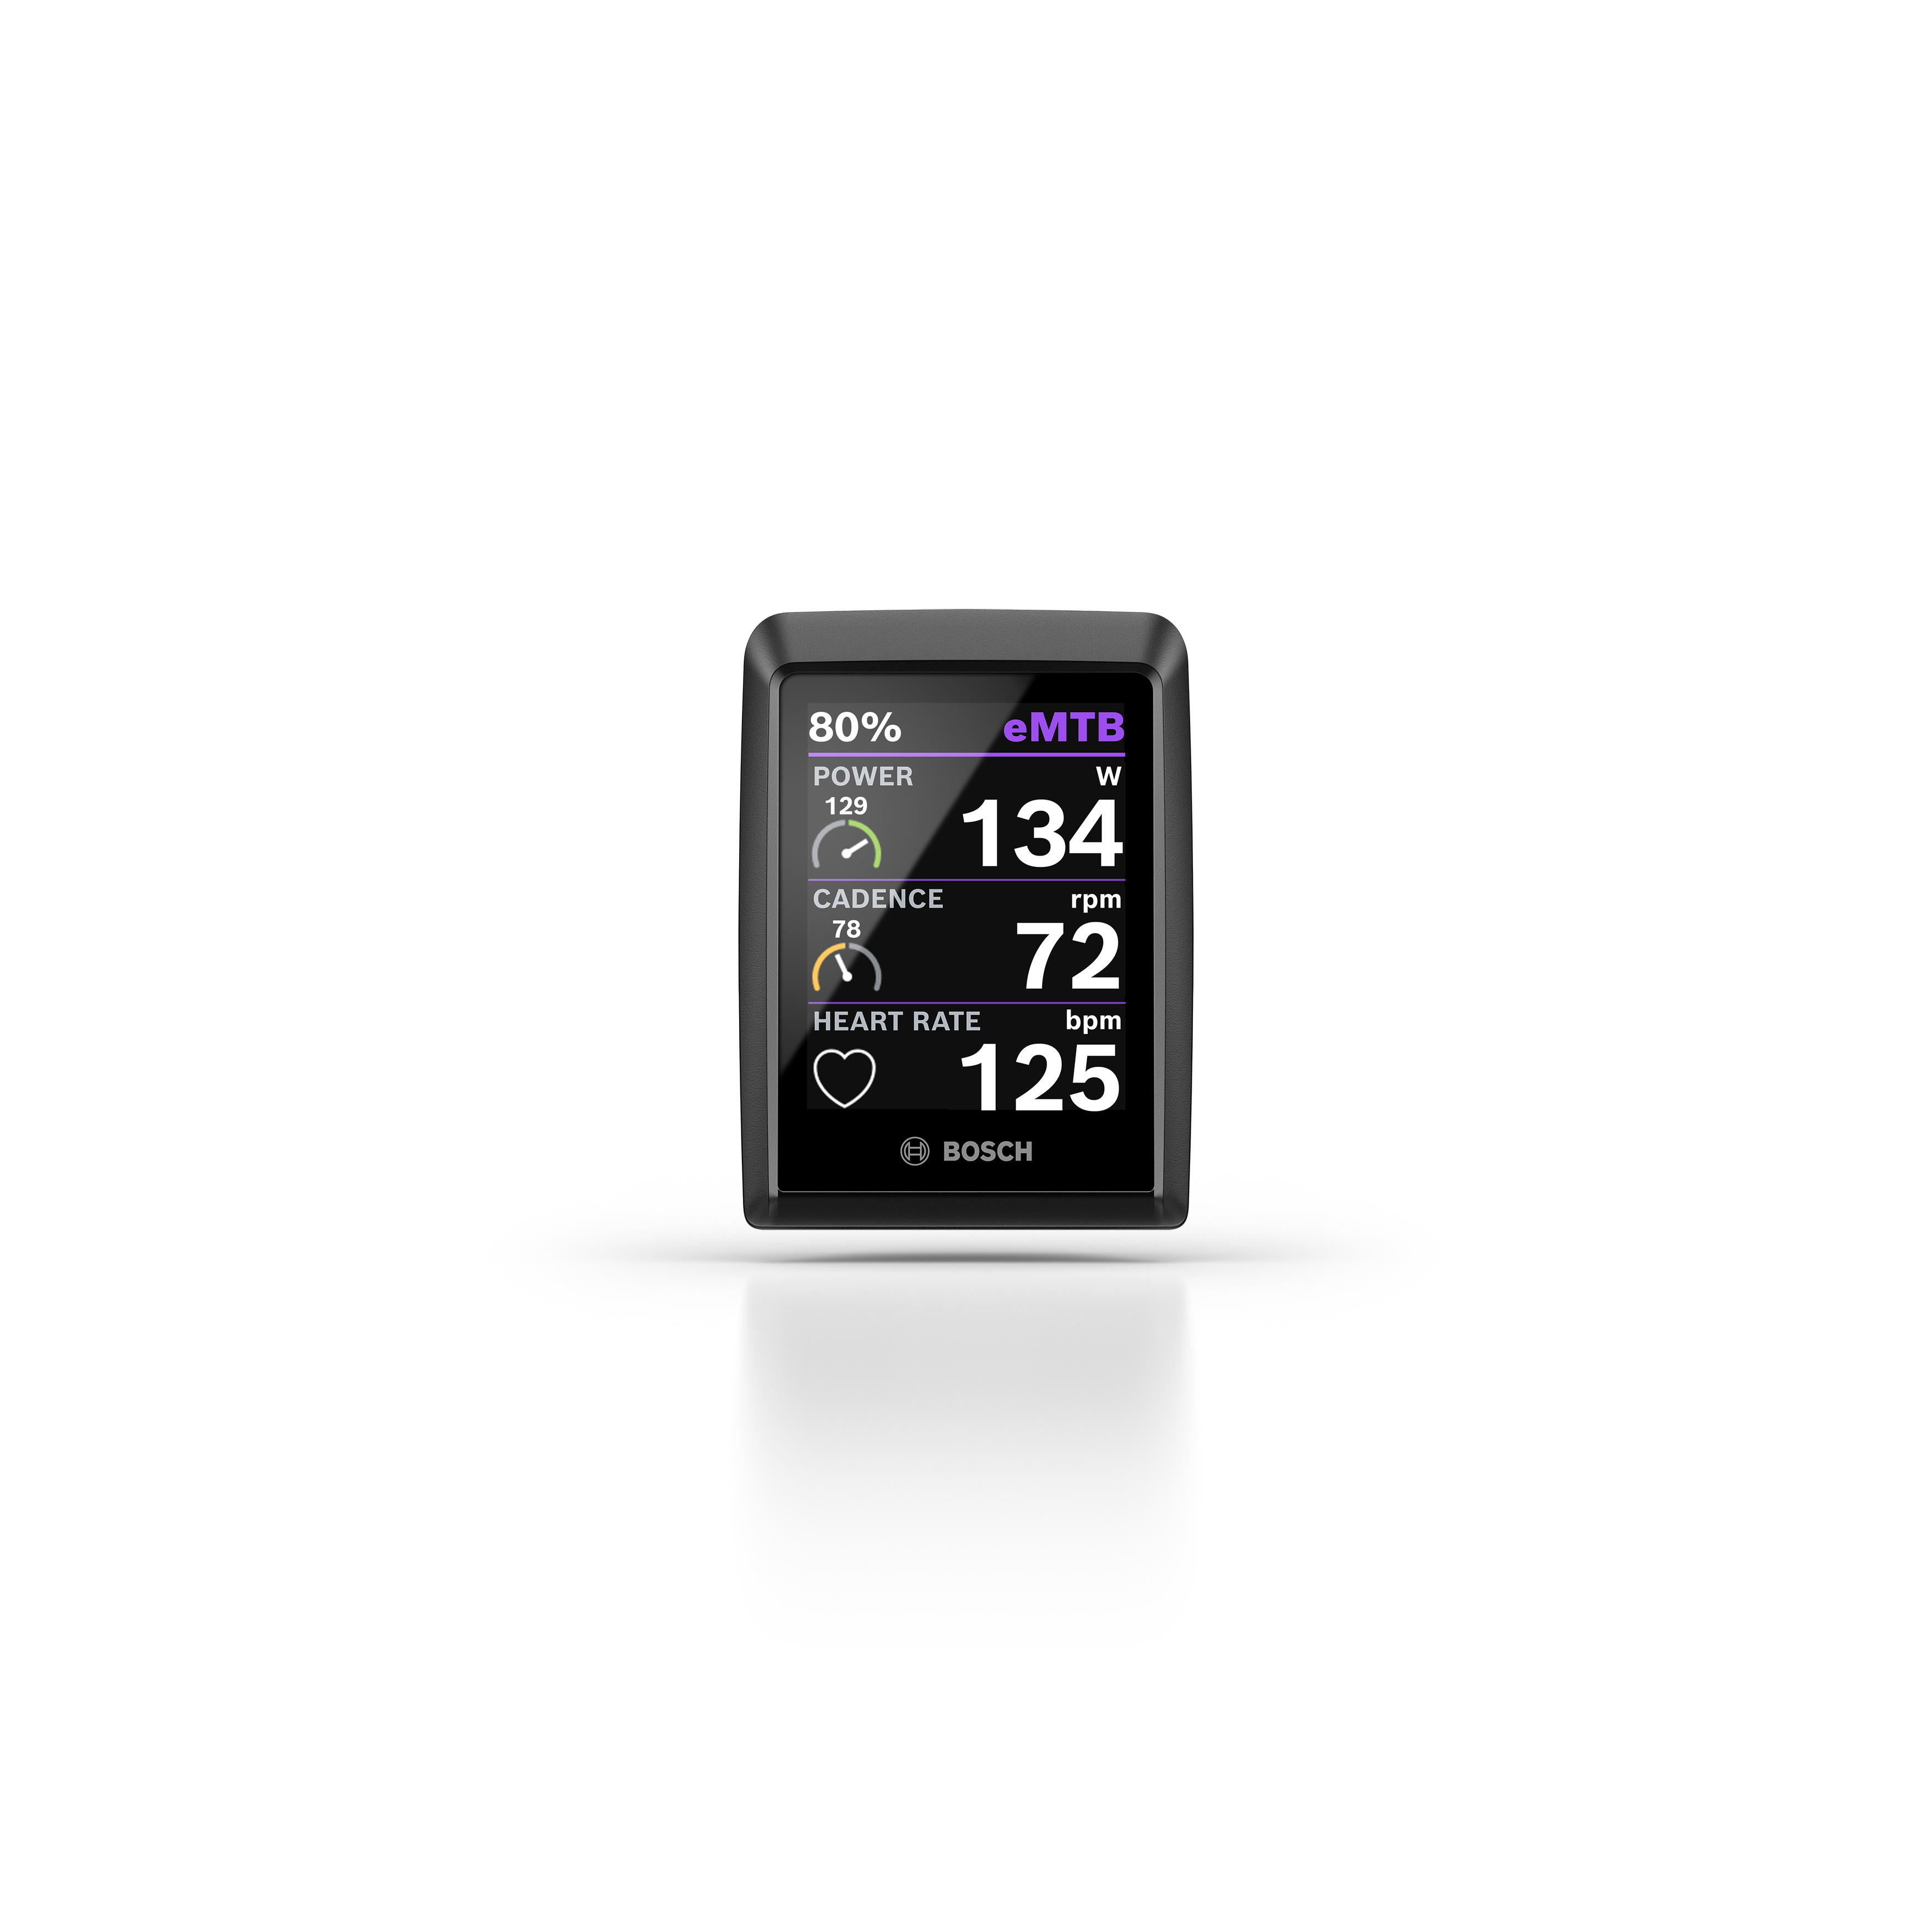 The user's heart rate is displayed on the Kiox display or ride screen while riding.